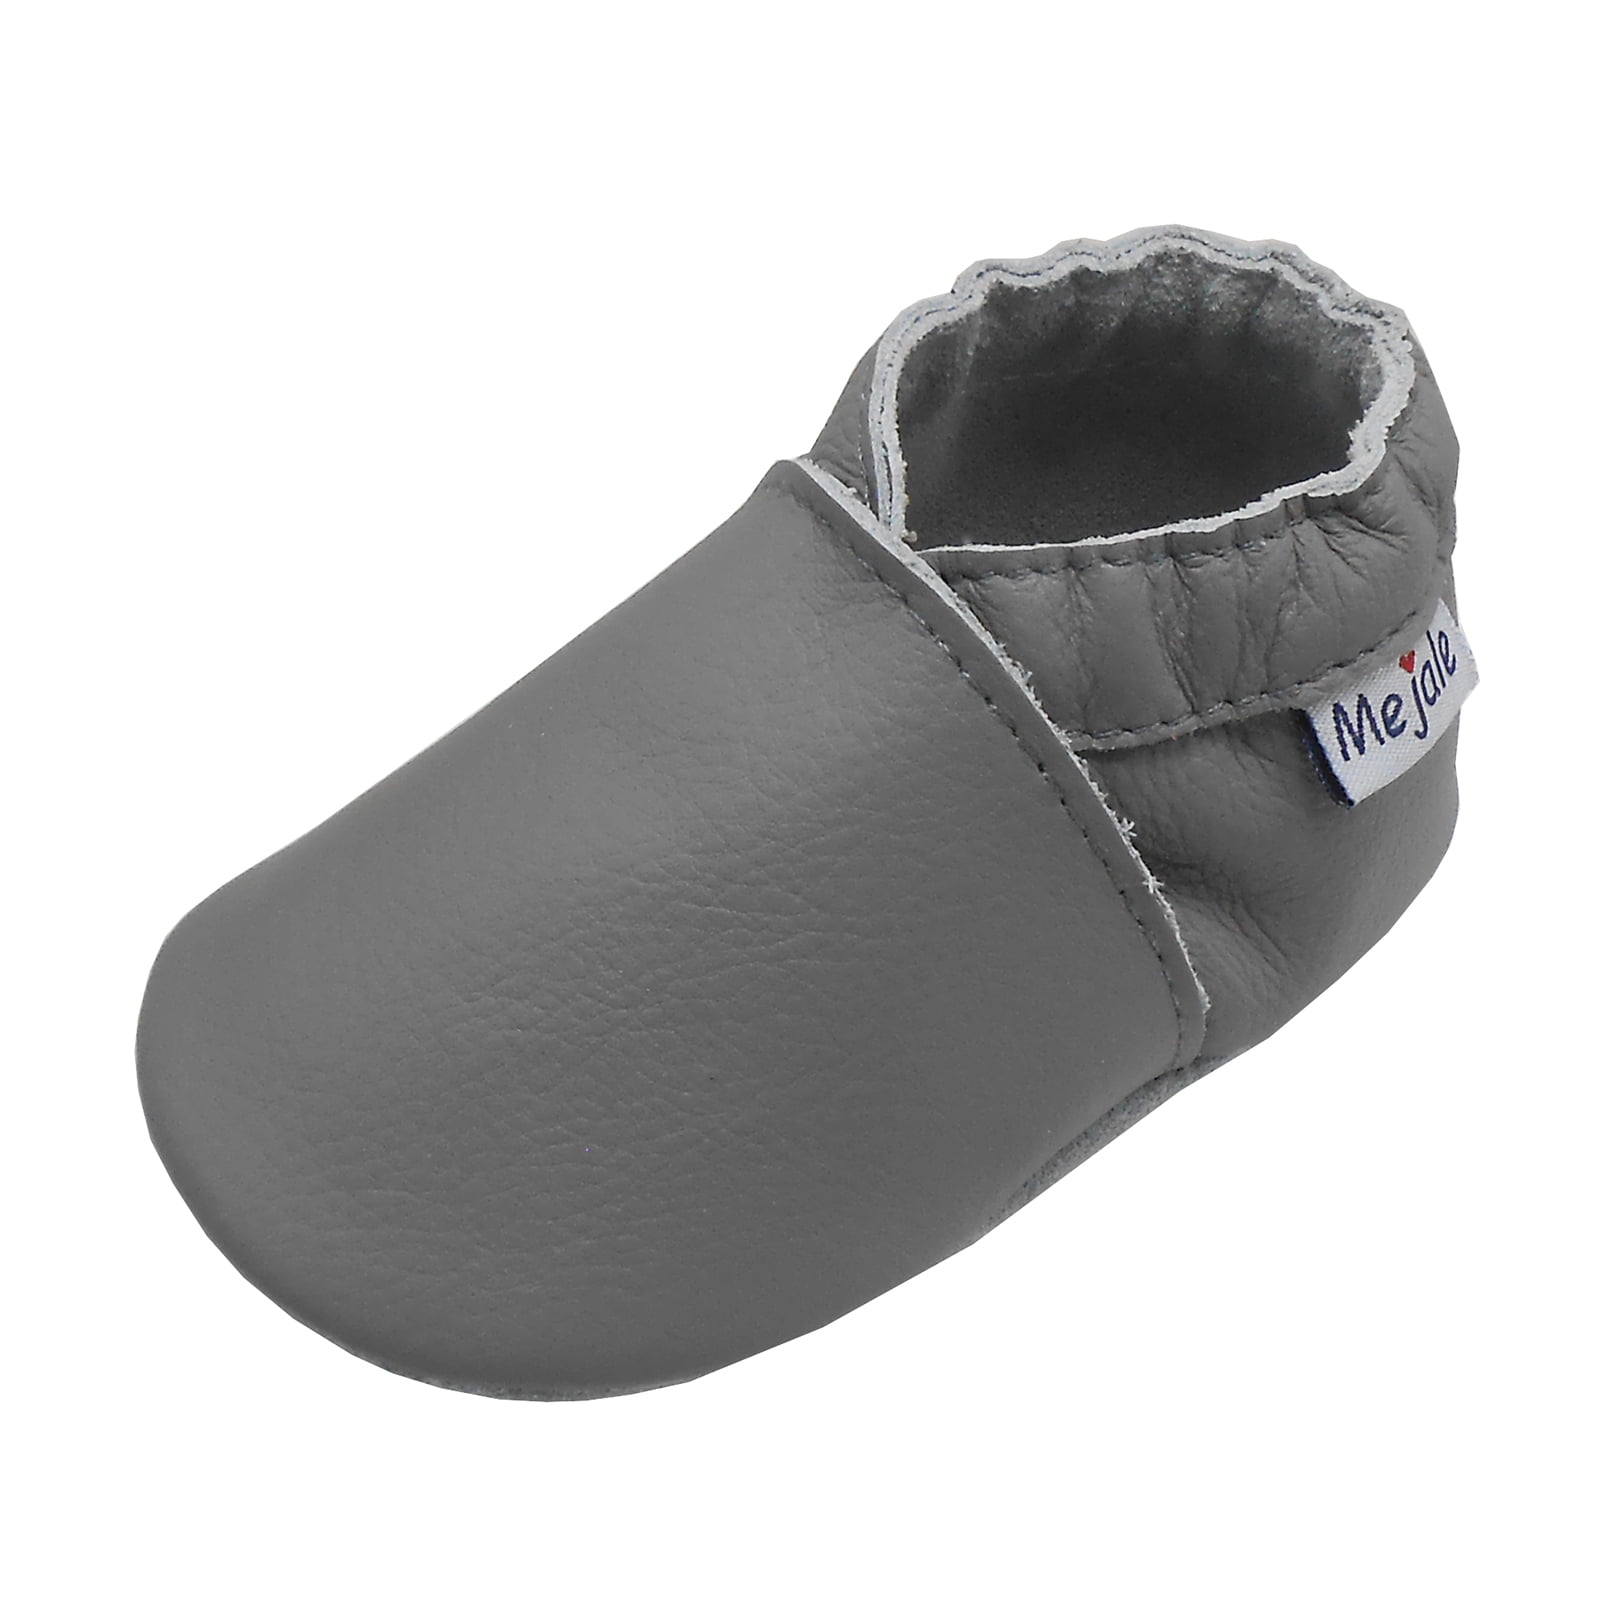 Mejale Baby Leather Shoes Infant Crawling Toddler Moccasins Brown White Purple Navy Cute Boys Girls Slippers 